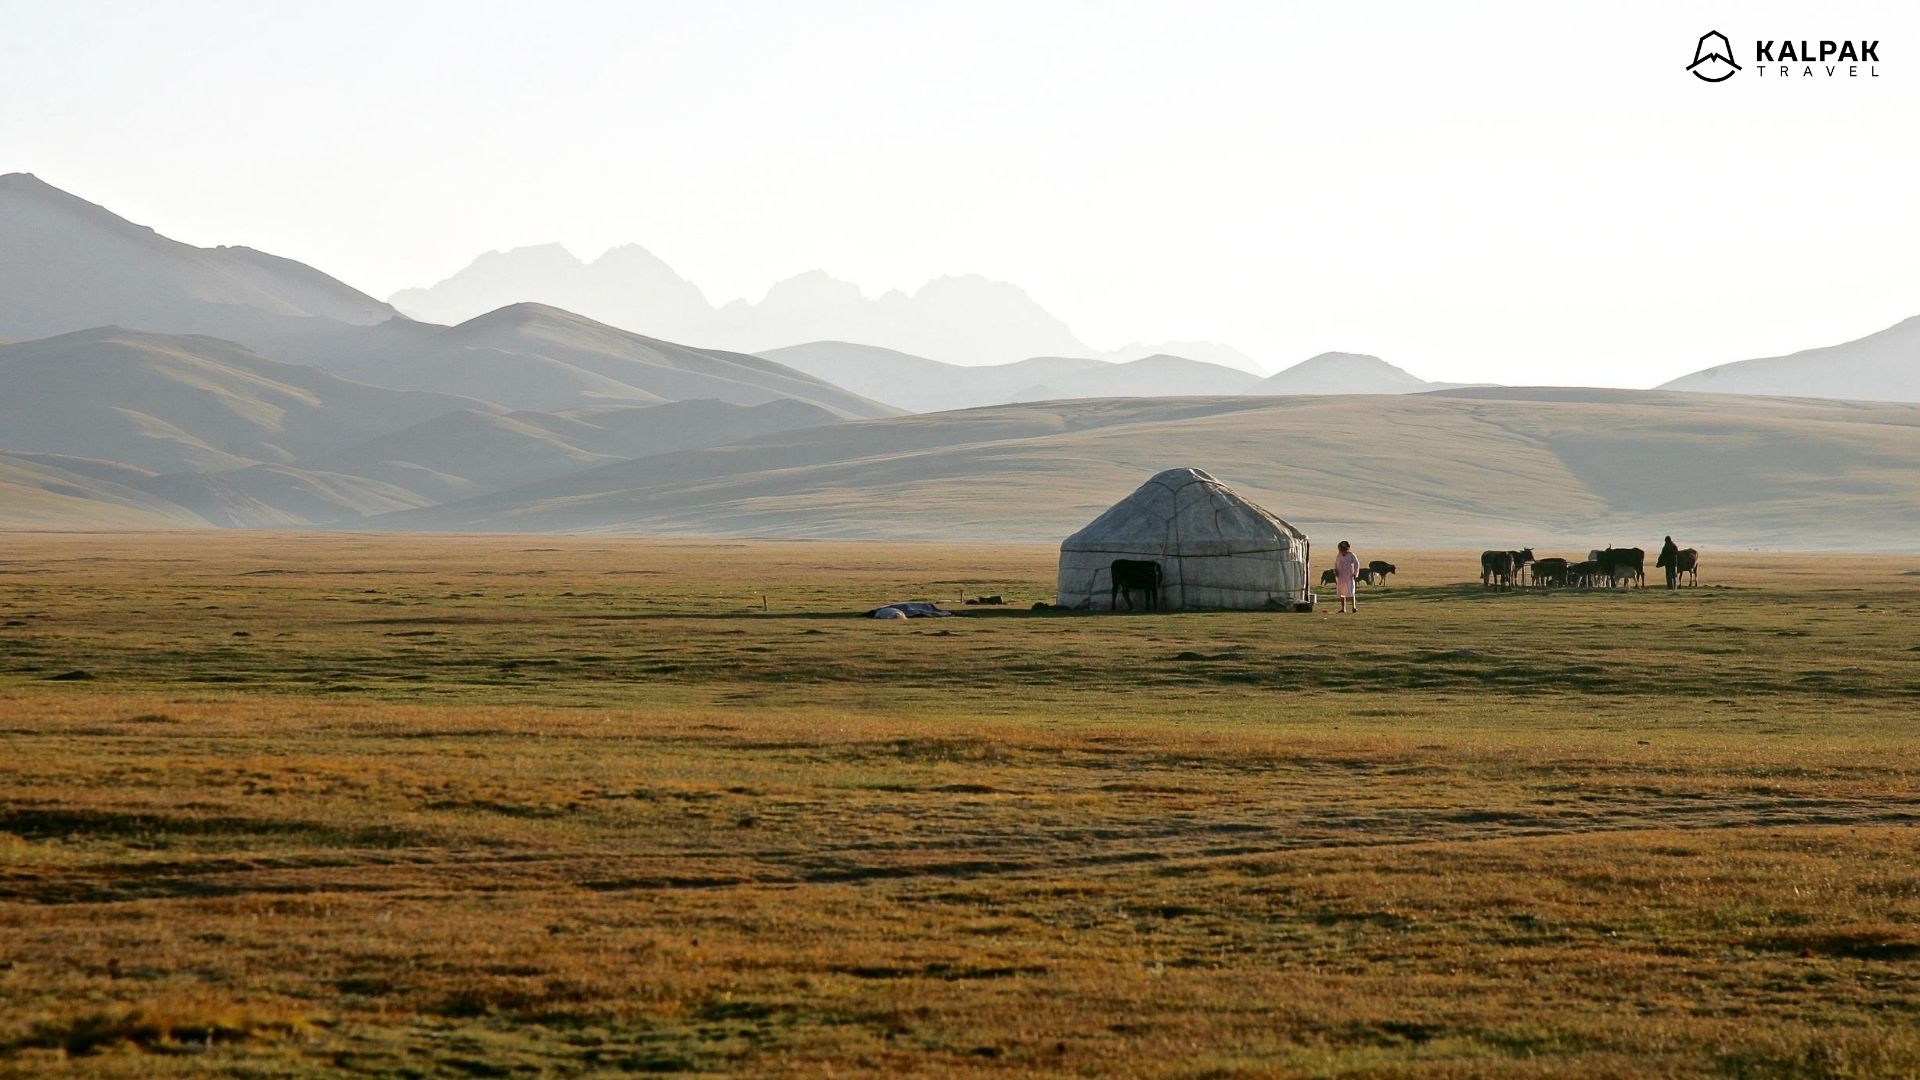 Song Kul pasture with yurts in Kyrgyzstan in Central Asia